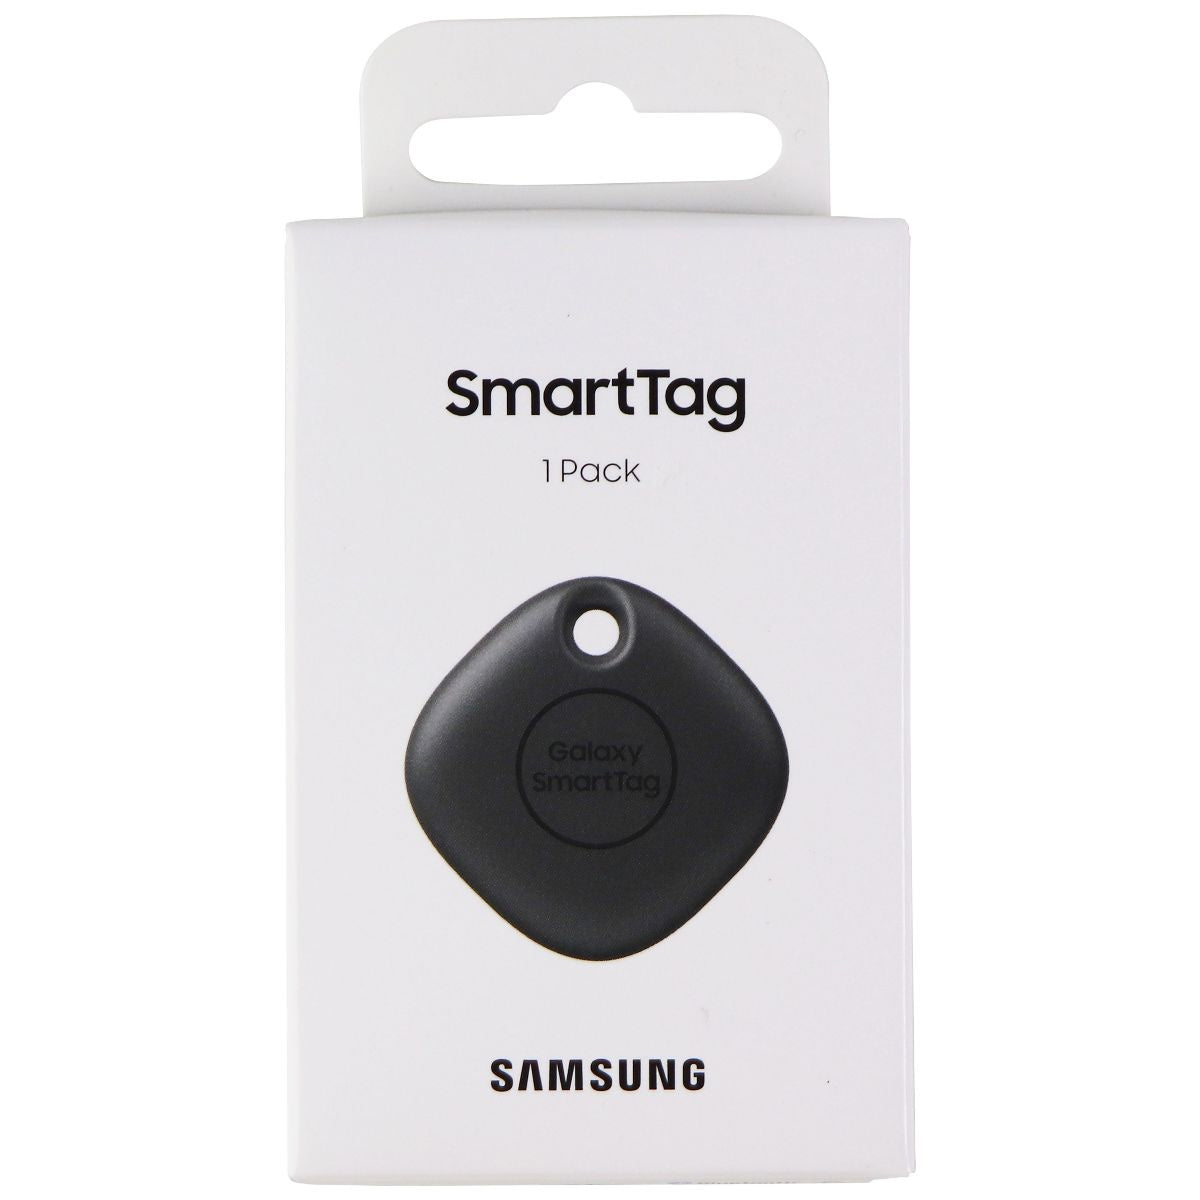 Official Samsung Galaxy SmartTag Bluetooth Compatible Tracker - Black